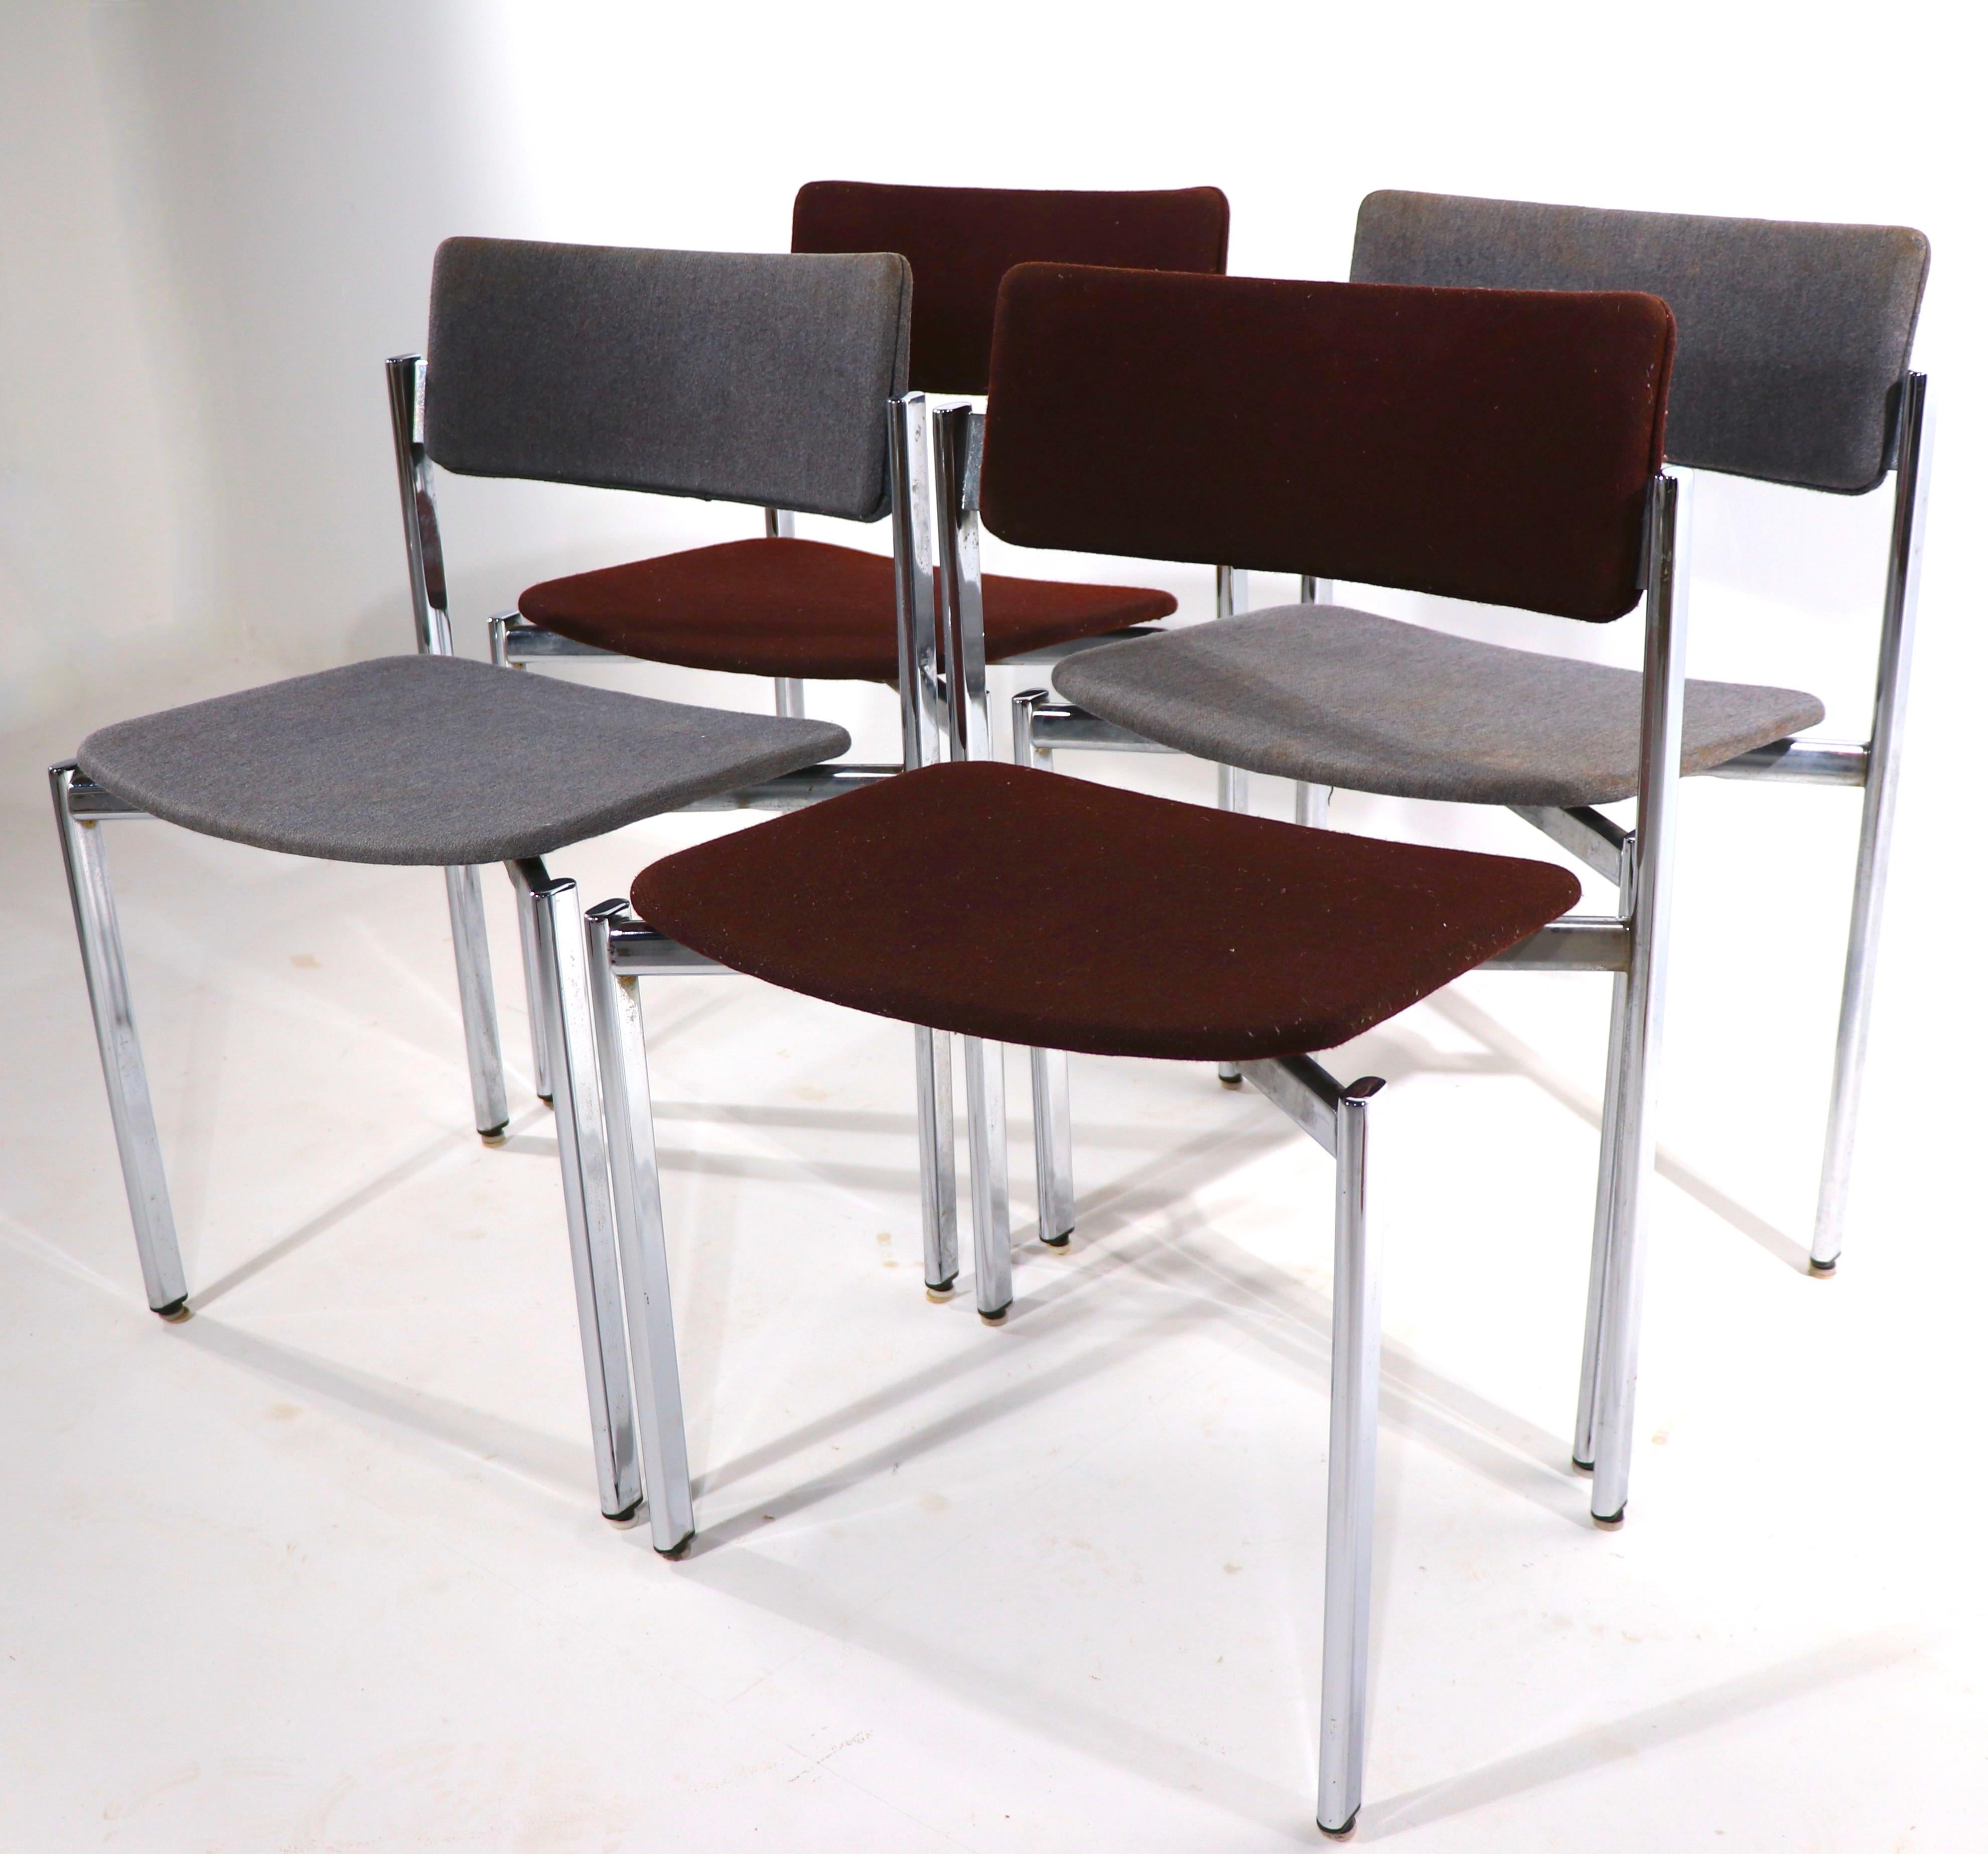 Sophisticated and chic set of four dining chairs designed by Ilmari Tapiovaara for Standing. Know as the Kiki chair, this iconic design was produced in Finland in the 1970's . These examples are structurally sound and sturdy, the chrome is bright